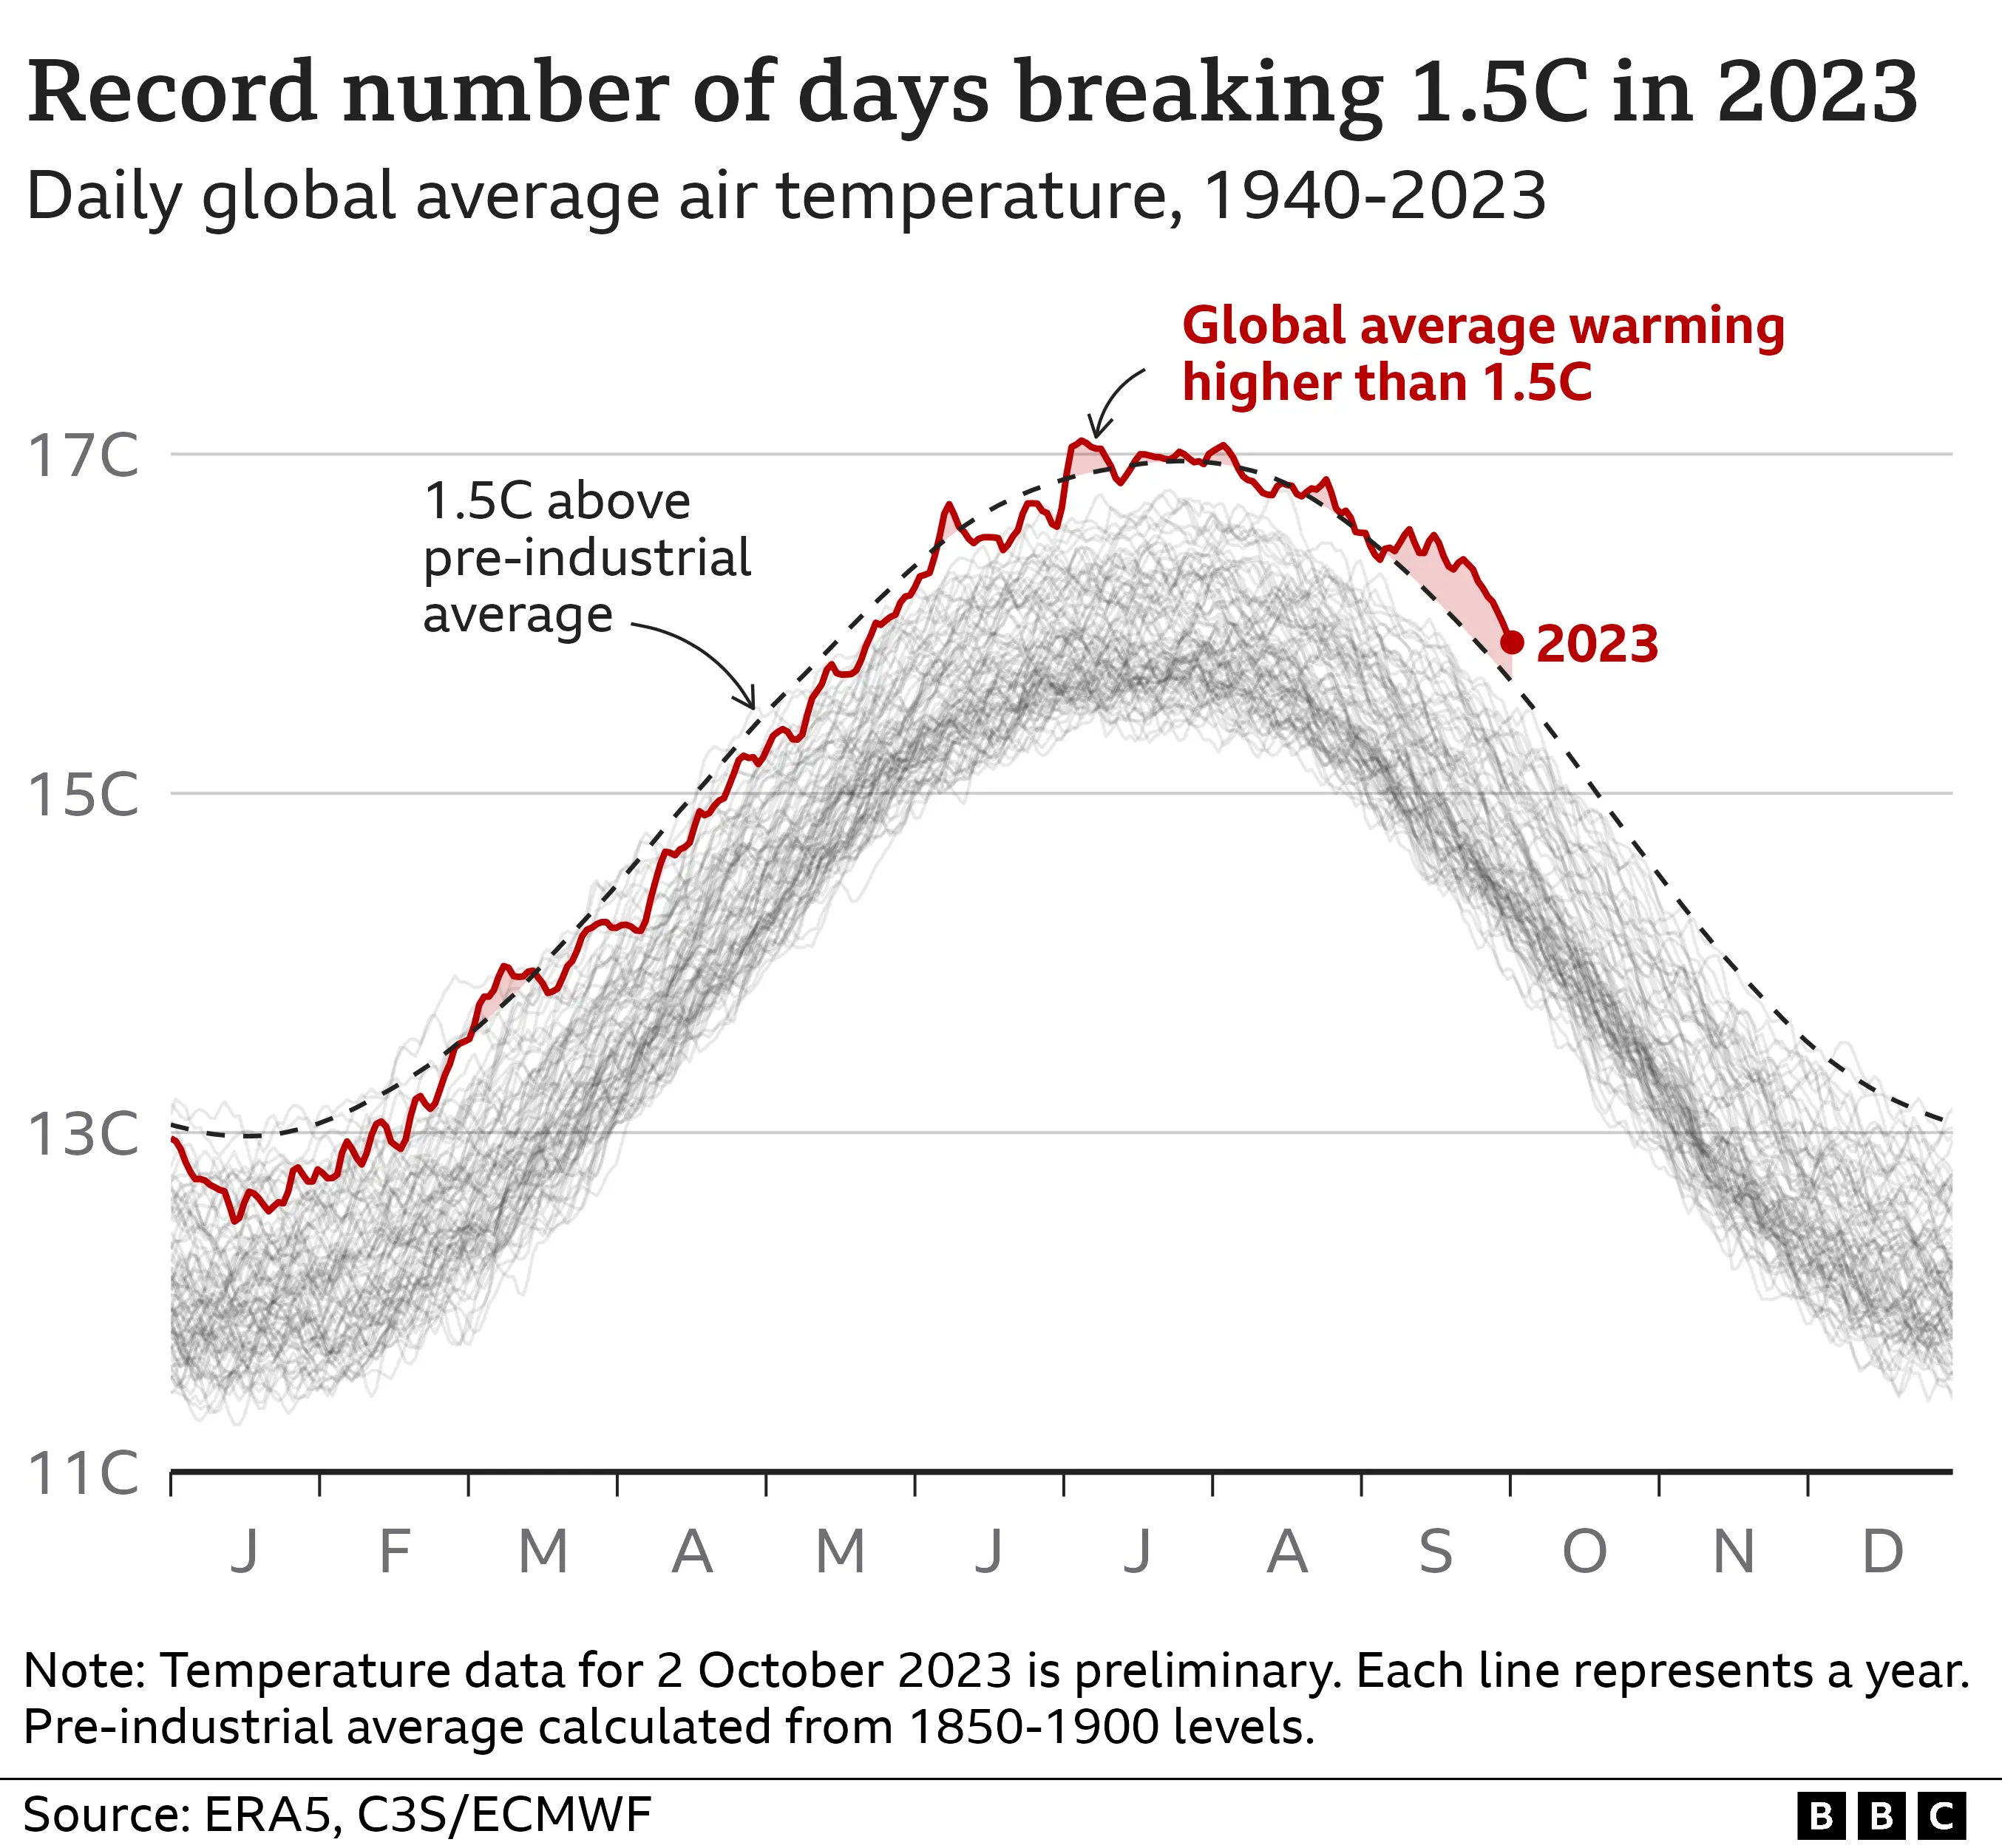 World breaches key 1.5C warming mark for record number of days